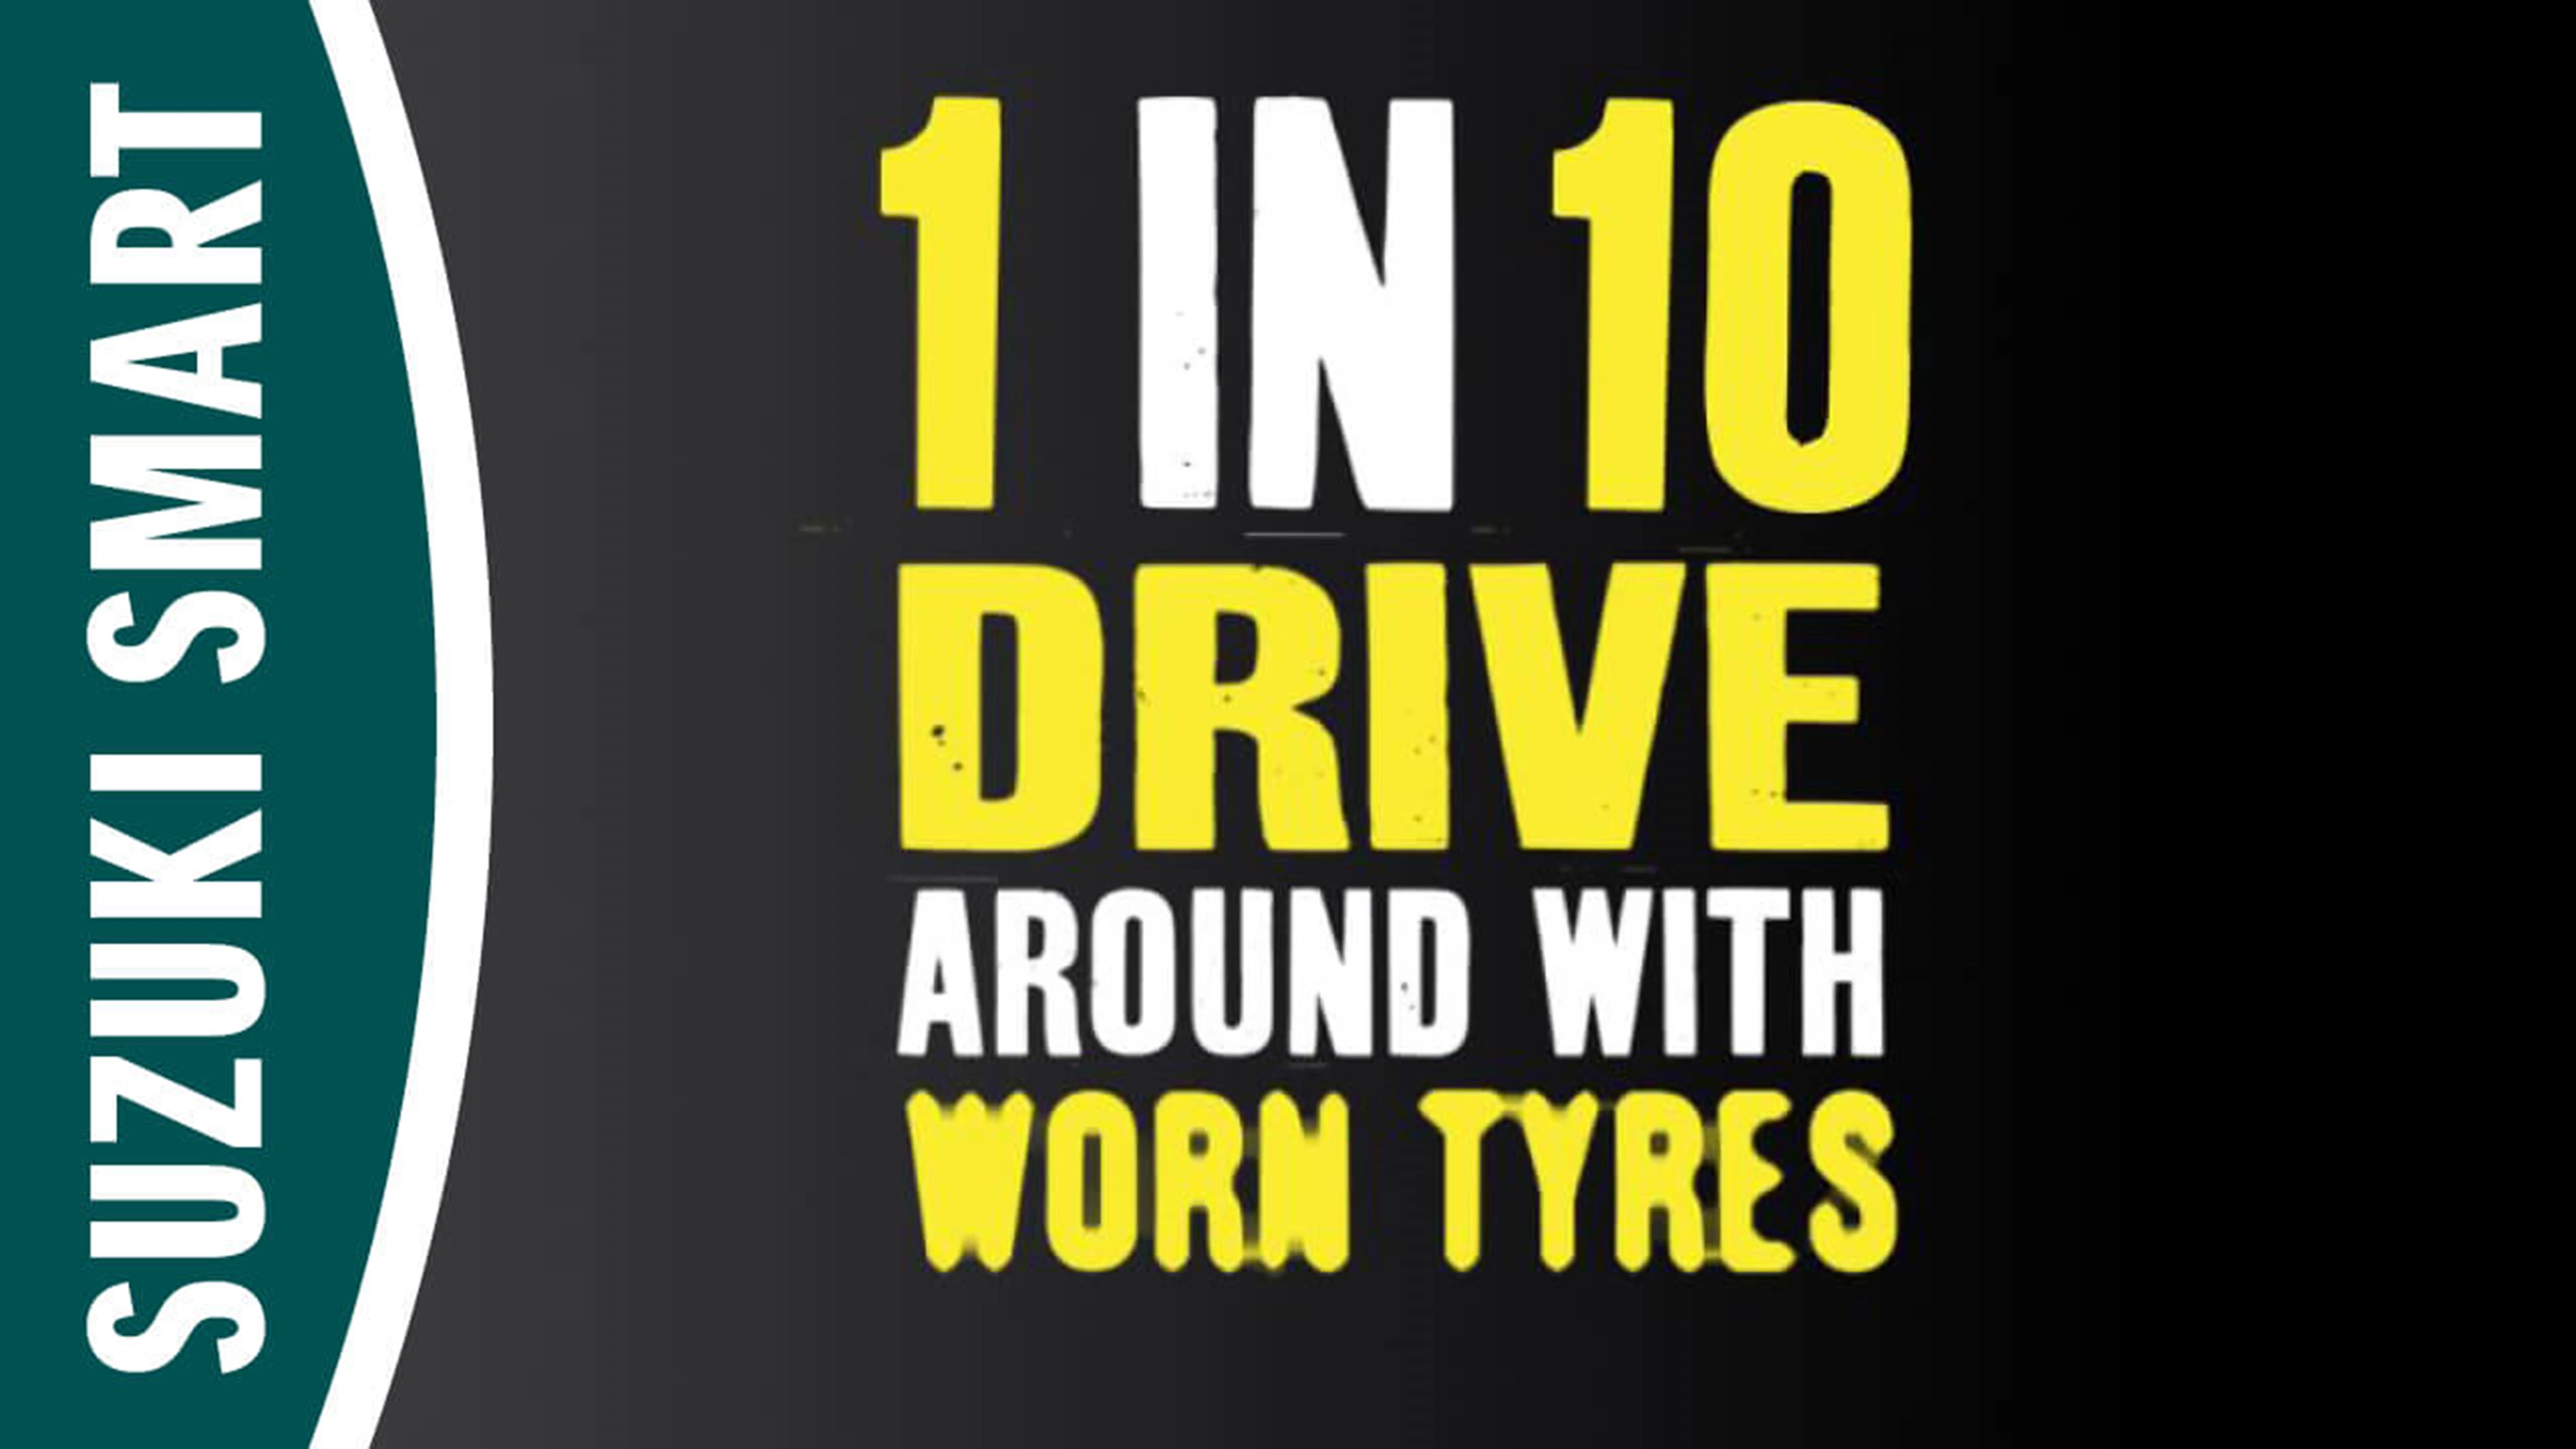 1 in 10 drive around with worn tyres